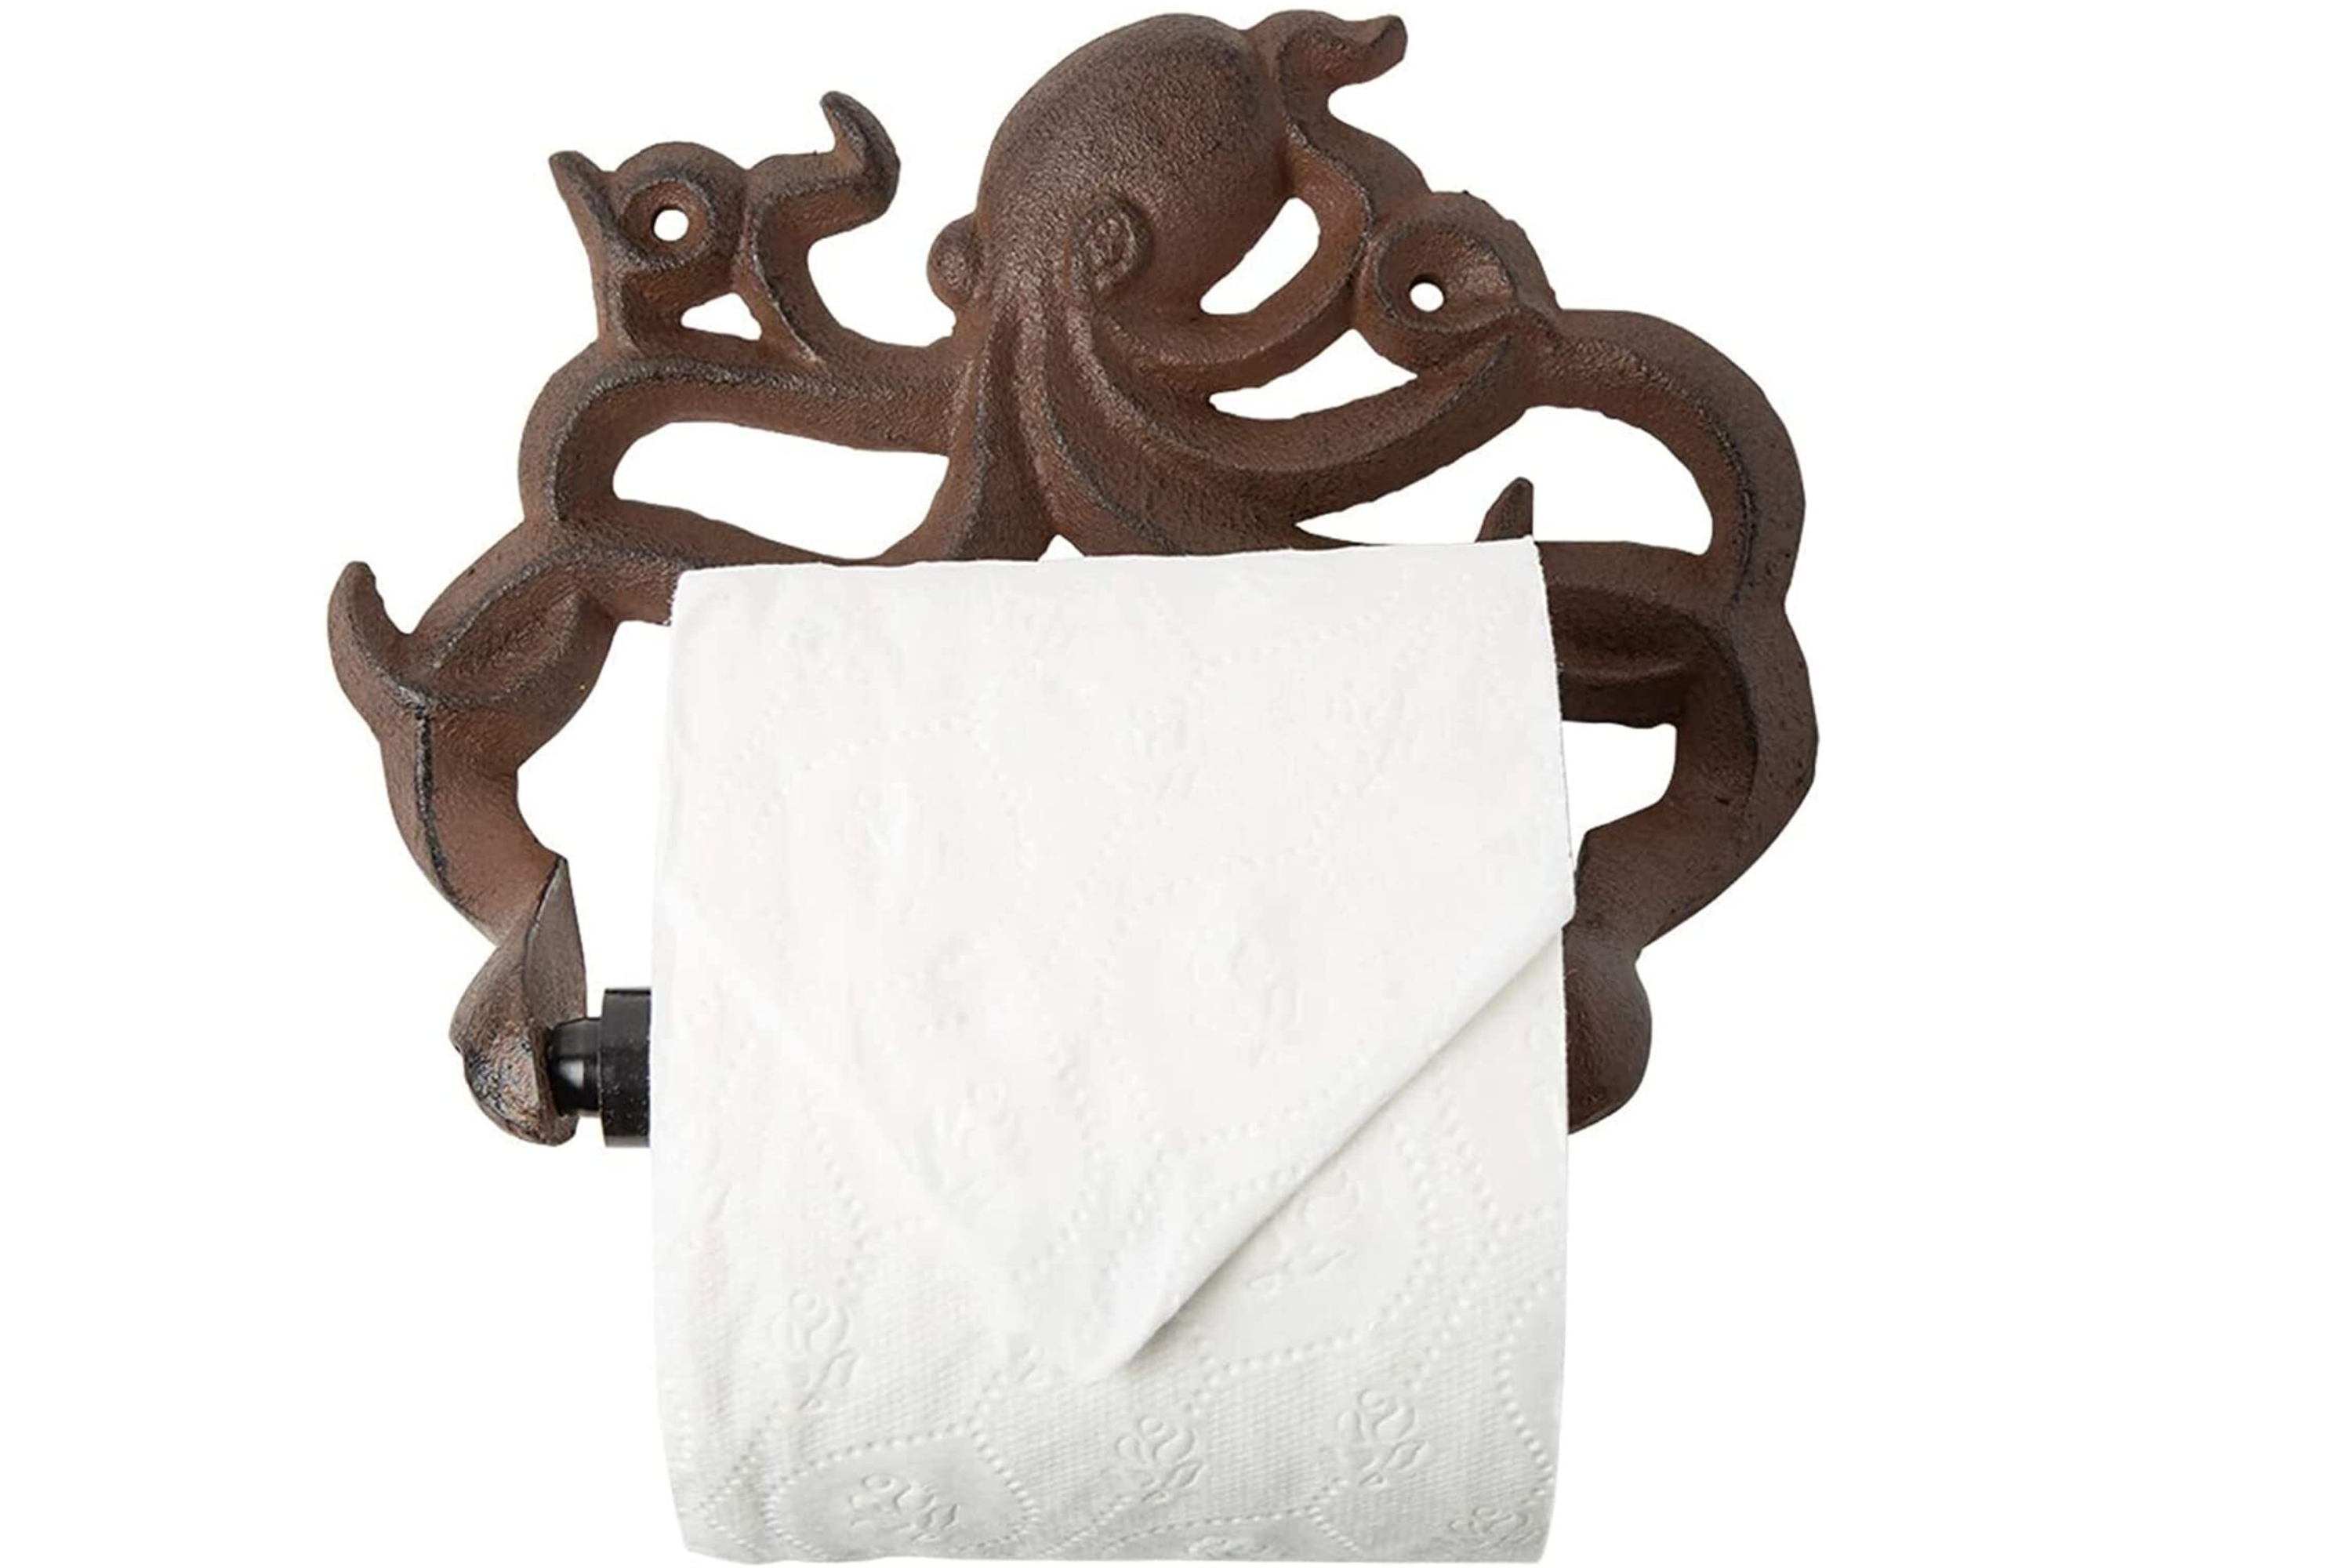 Decorative Cast Iron Octopus Toilet Paper Roll Holder– Comfify